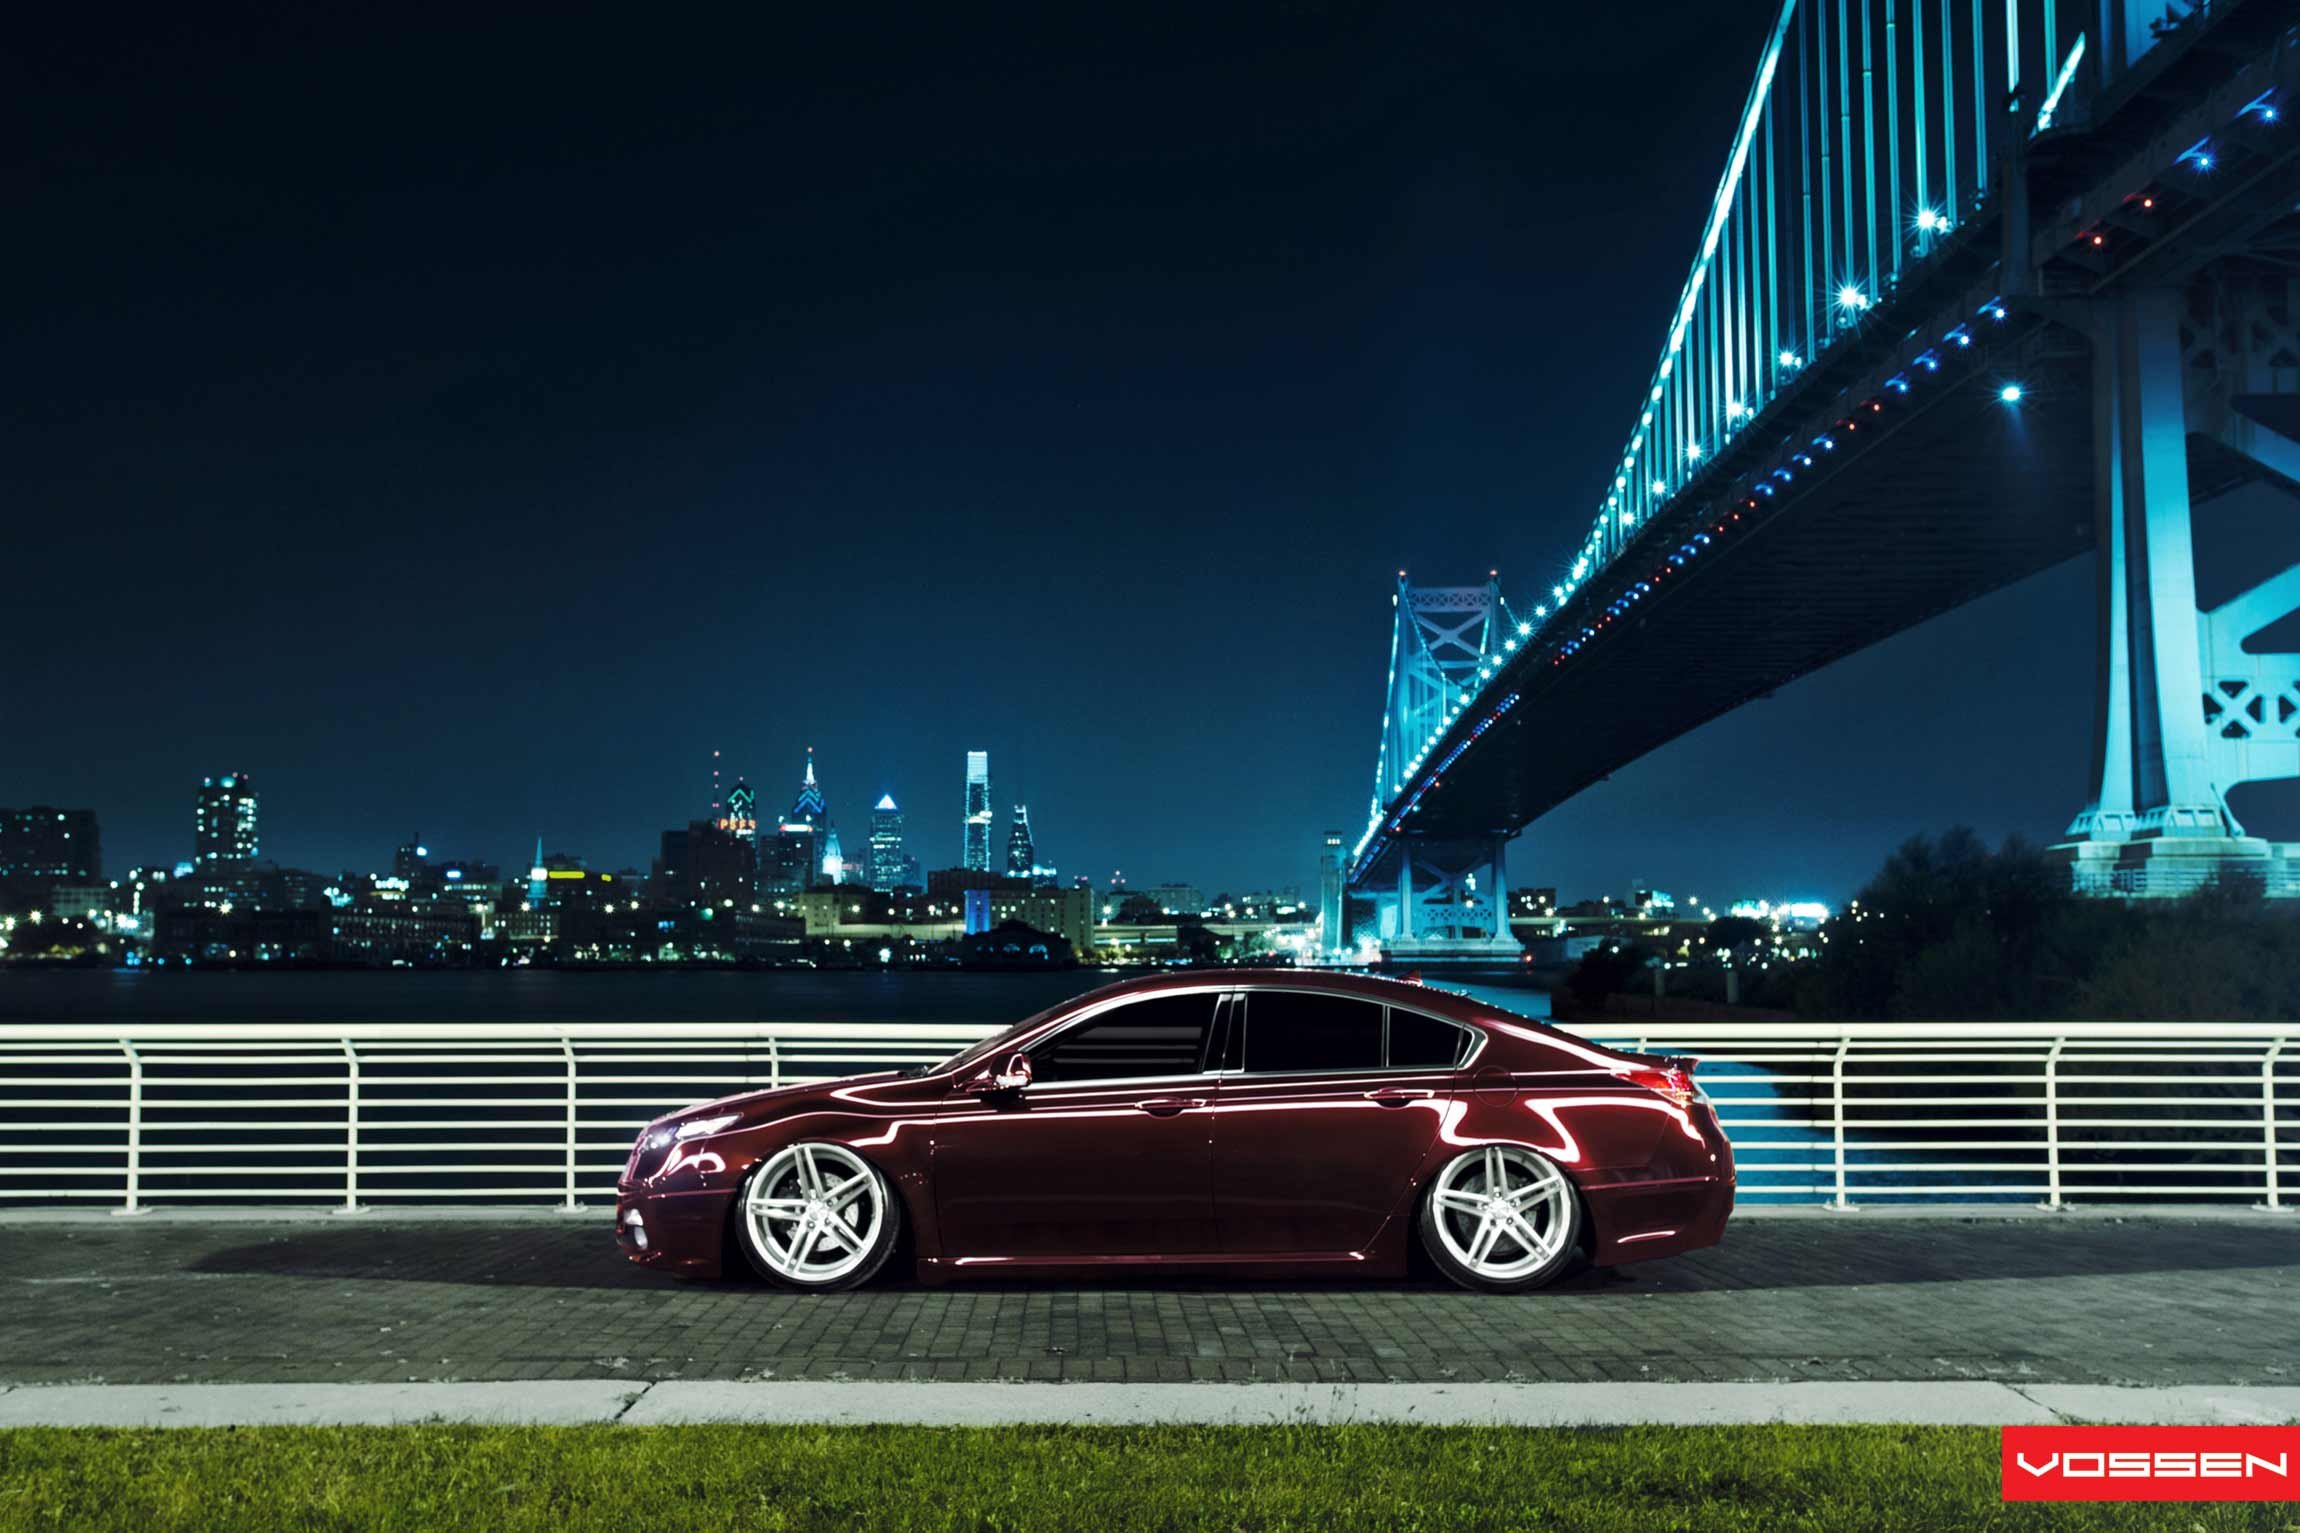 Aftermarket Side Skirts on Red Acura TL - Photo by Vossen